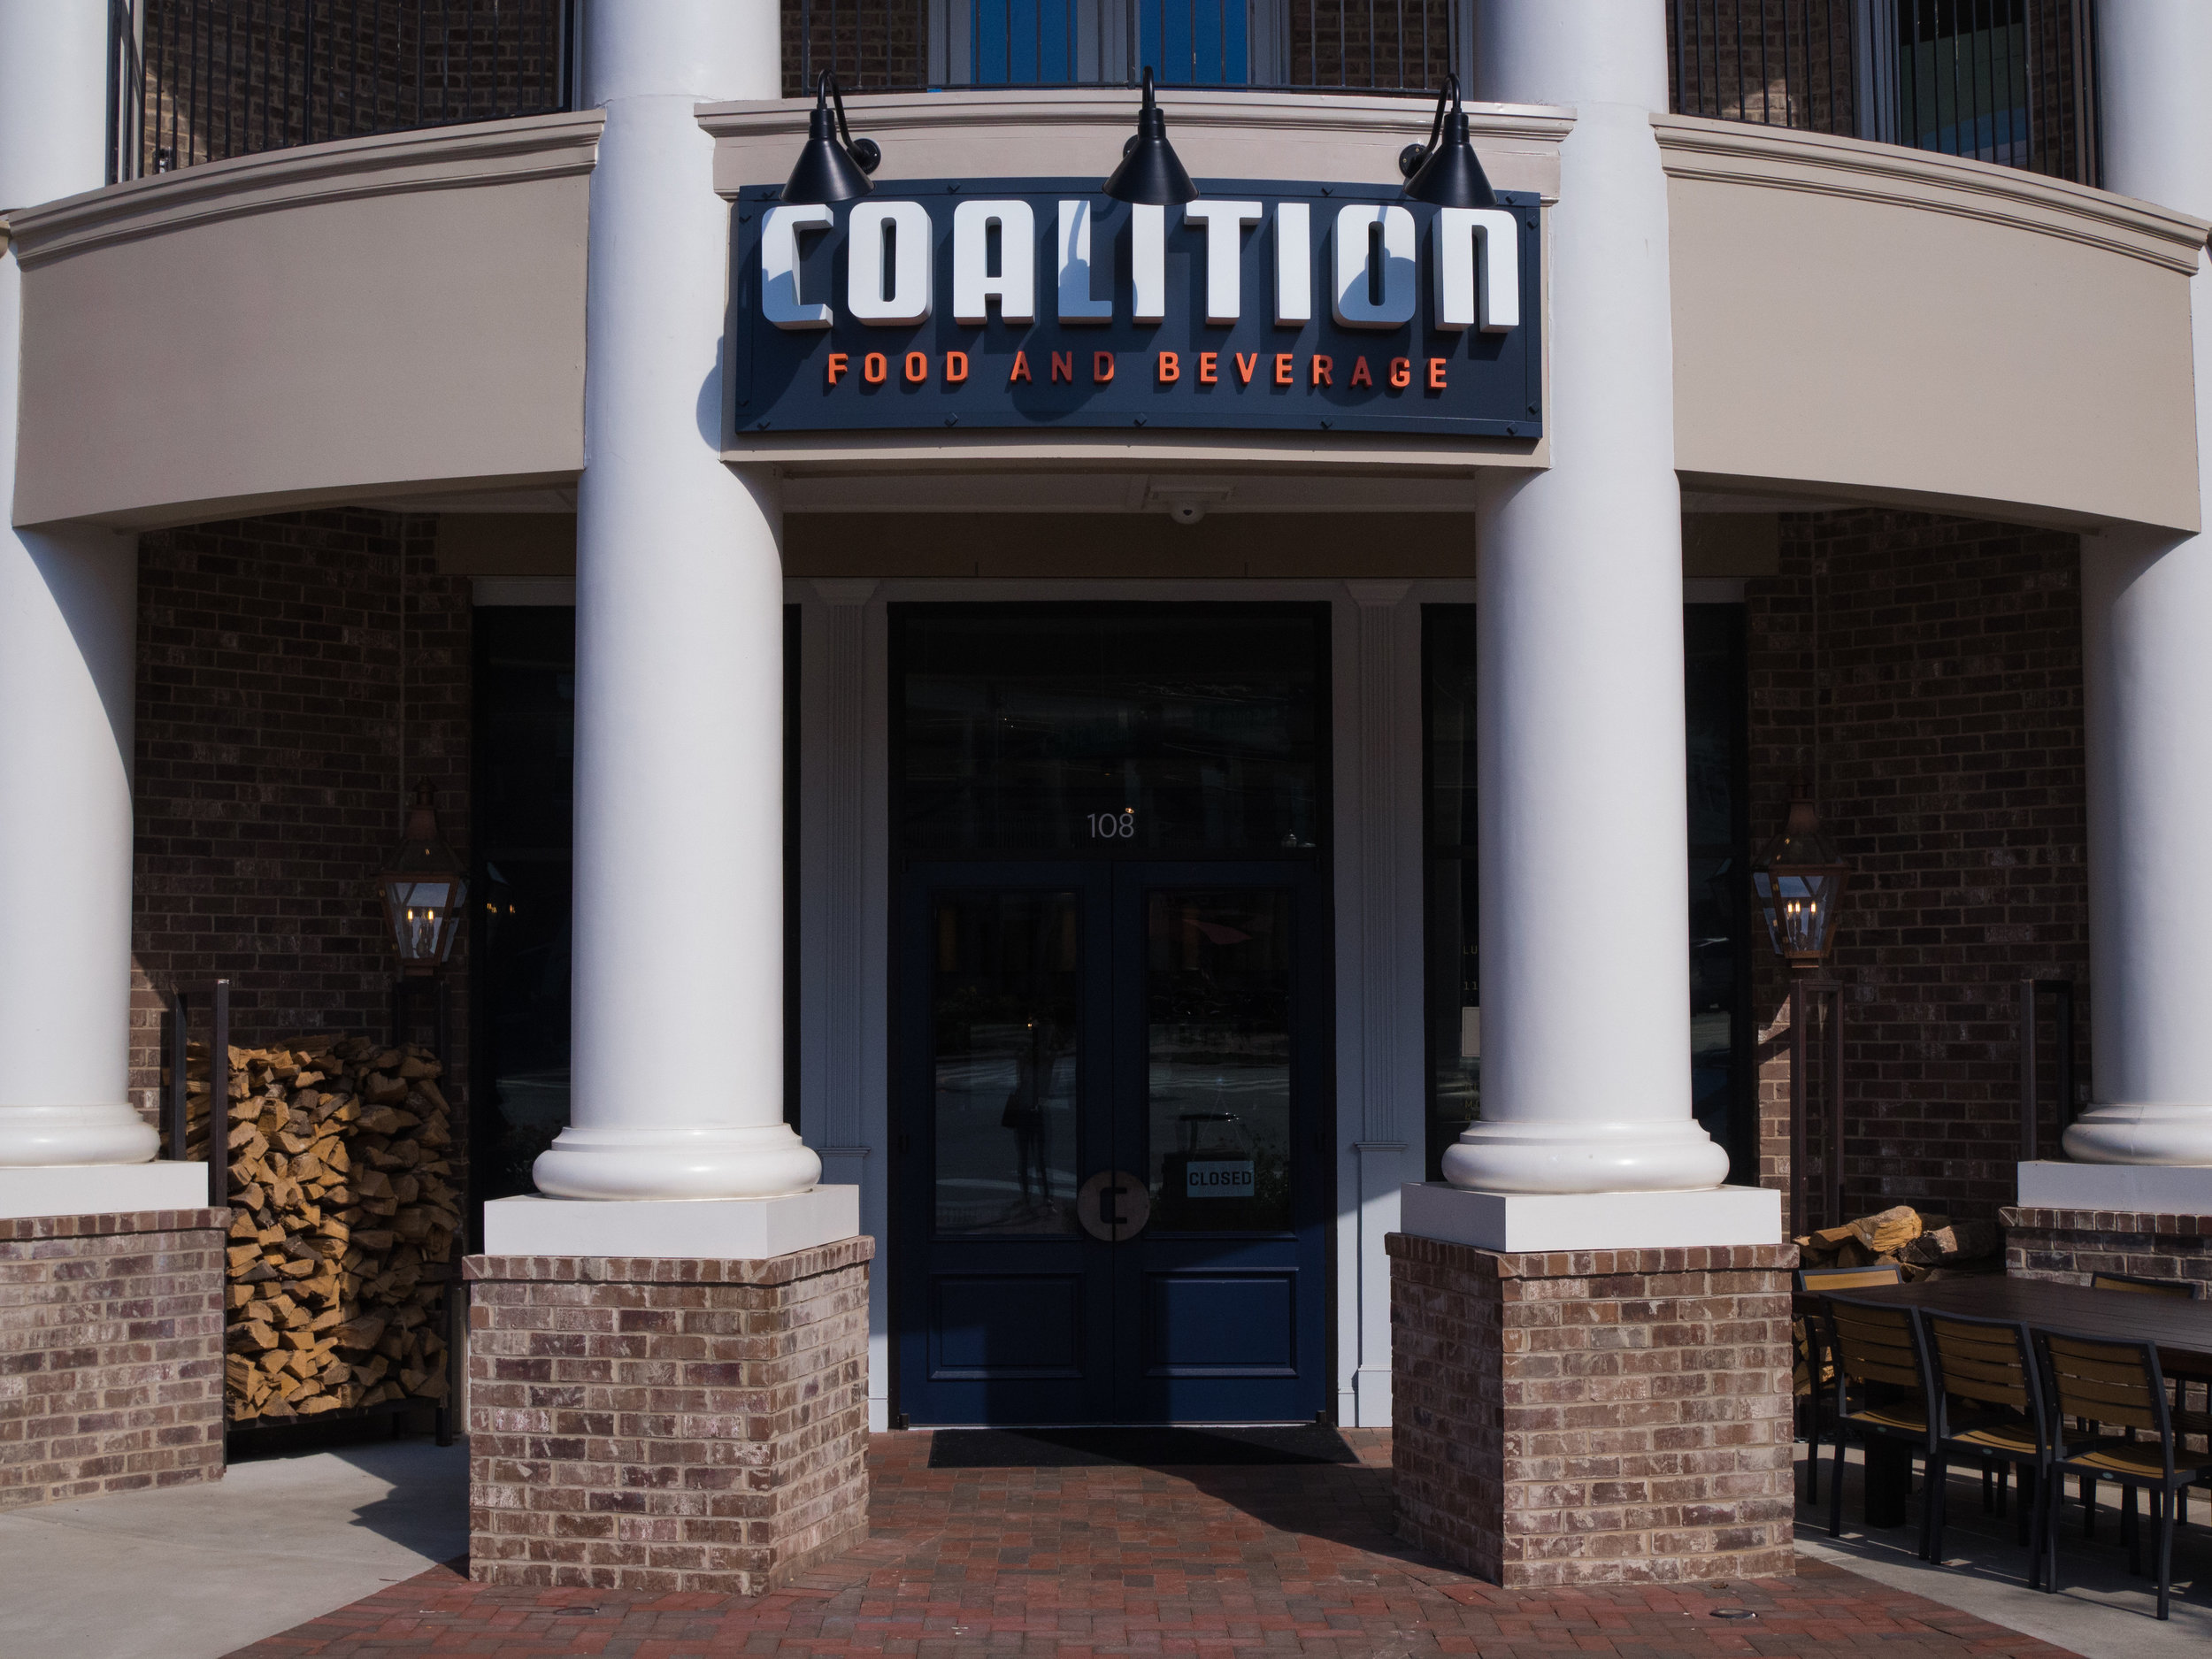 Coalition Food and Beverage Exterior Signage over entrance